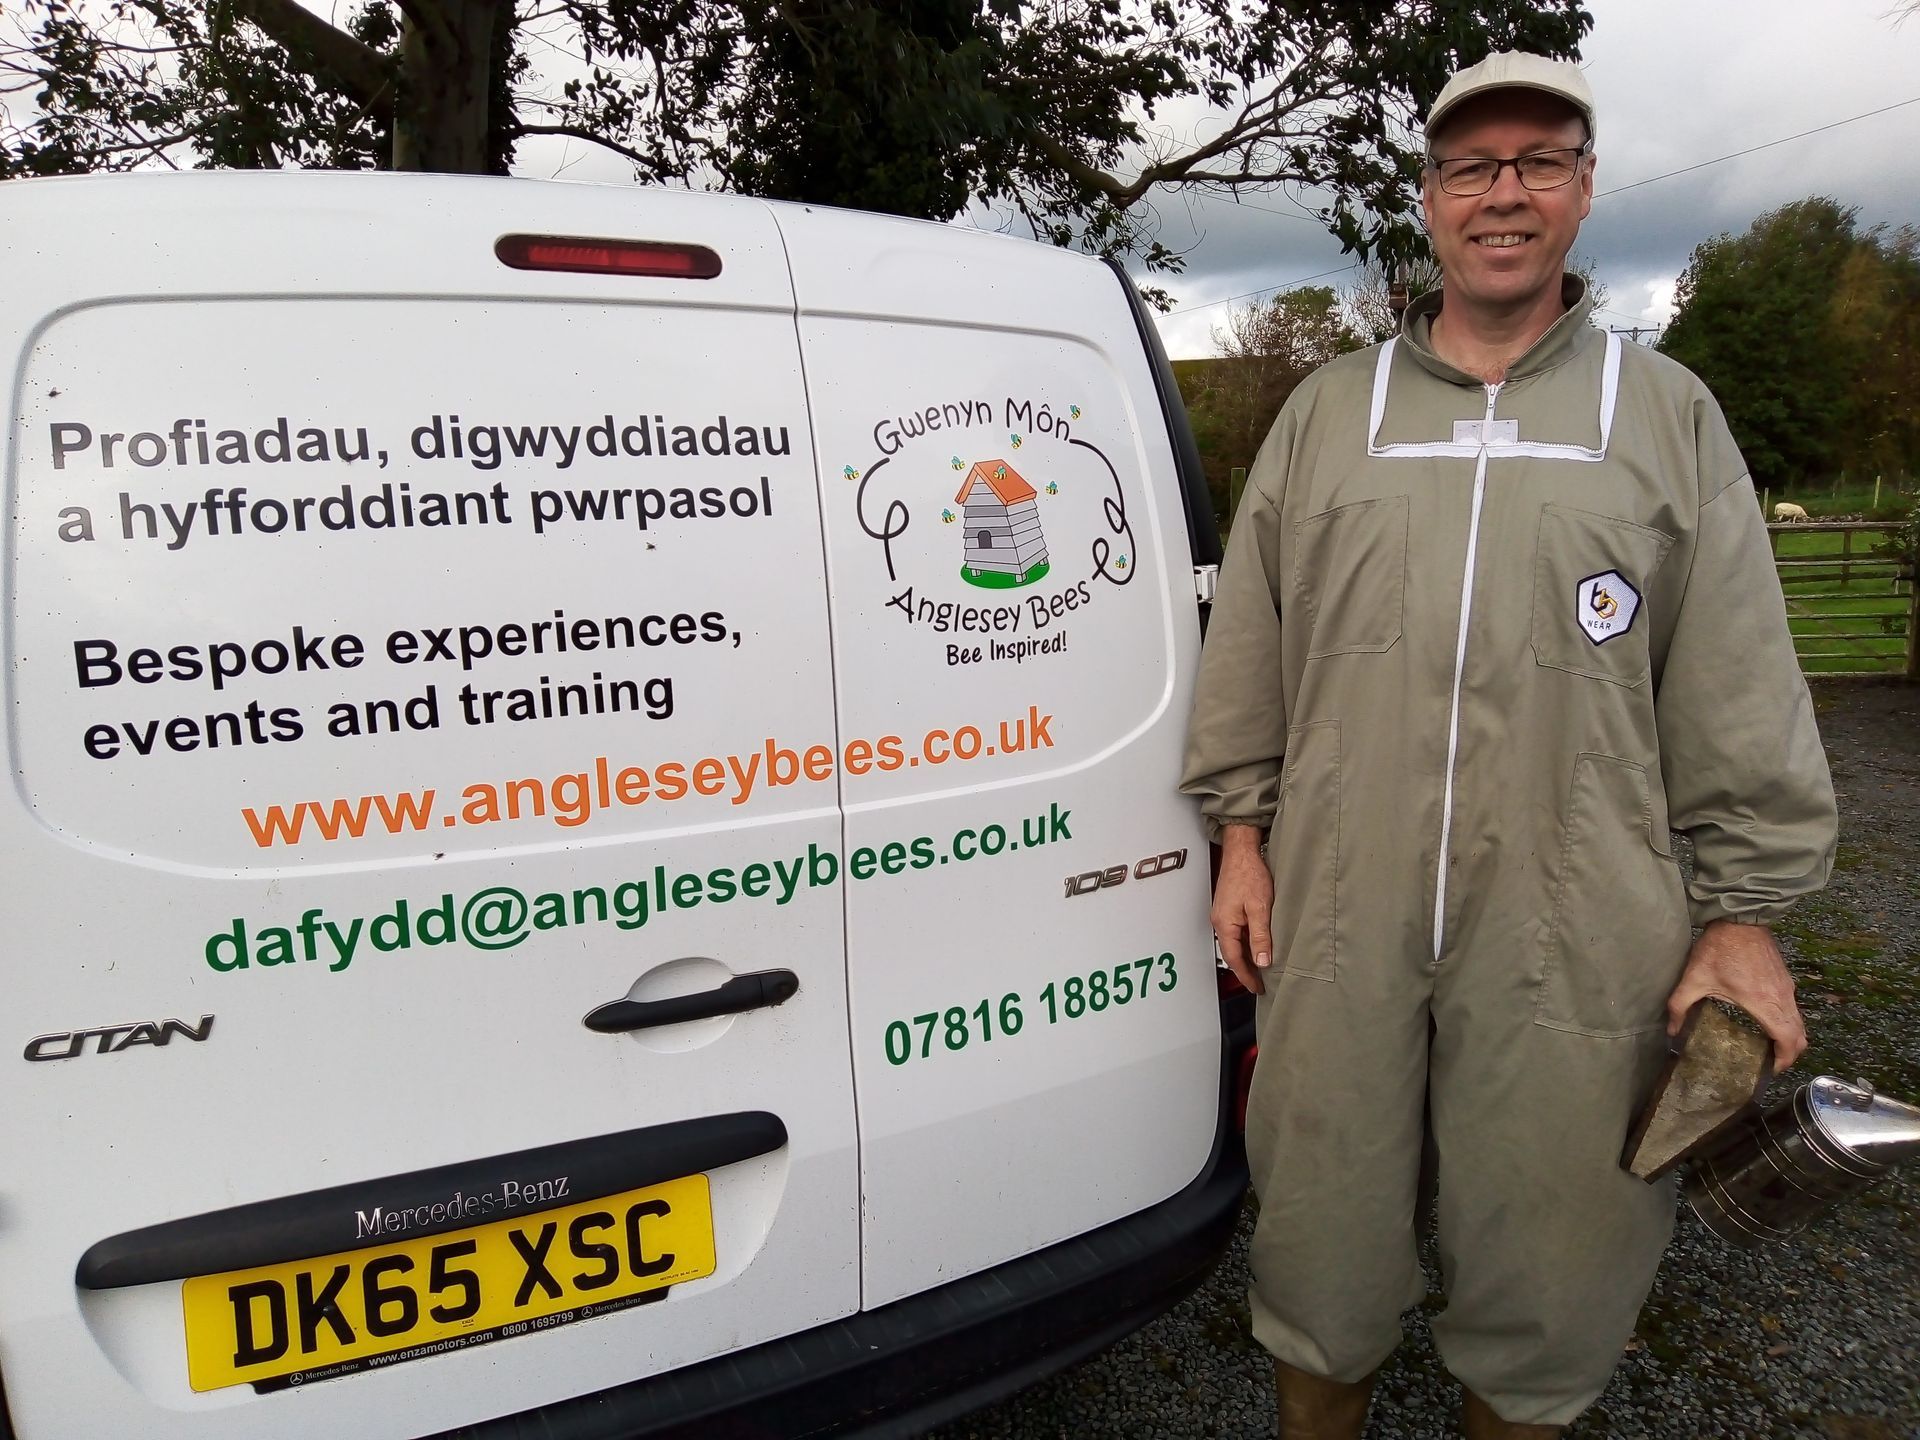 Ready for work at Anglesey Bees